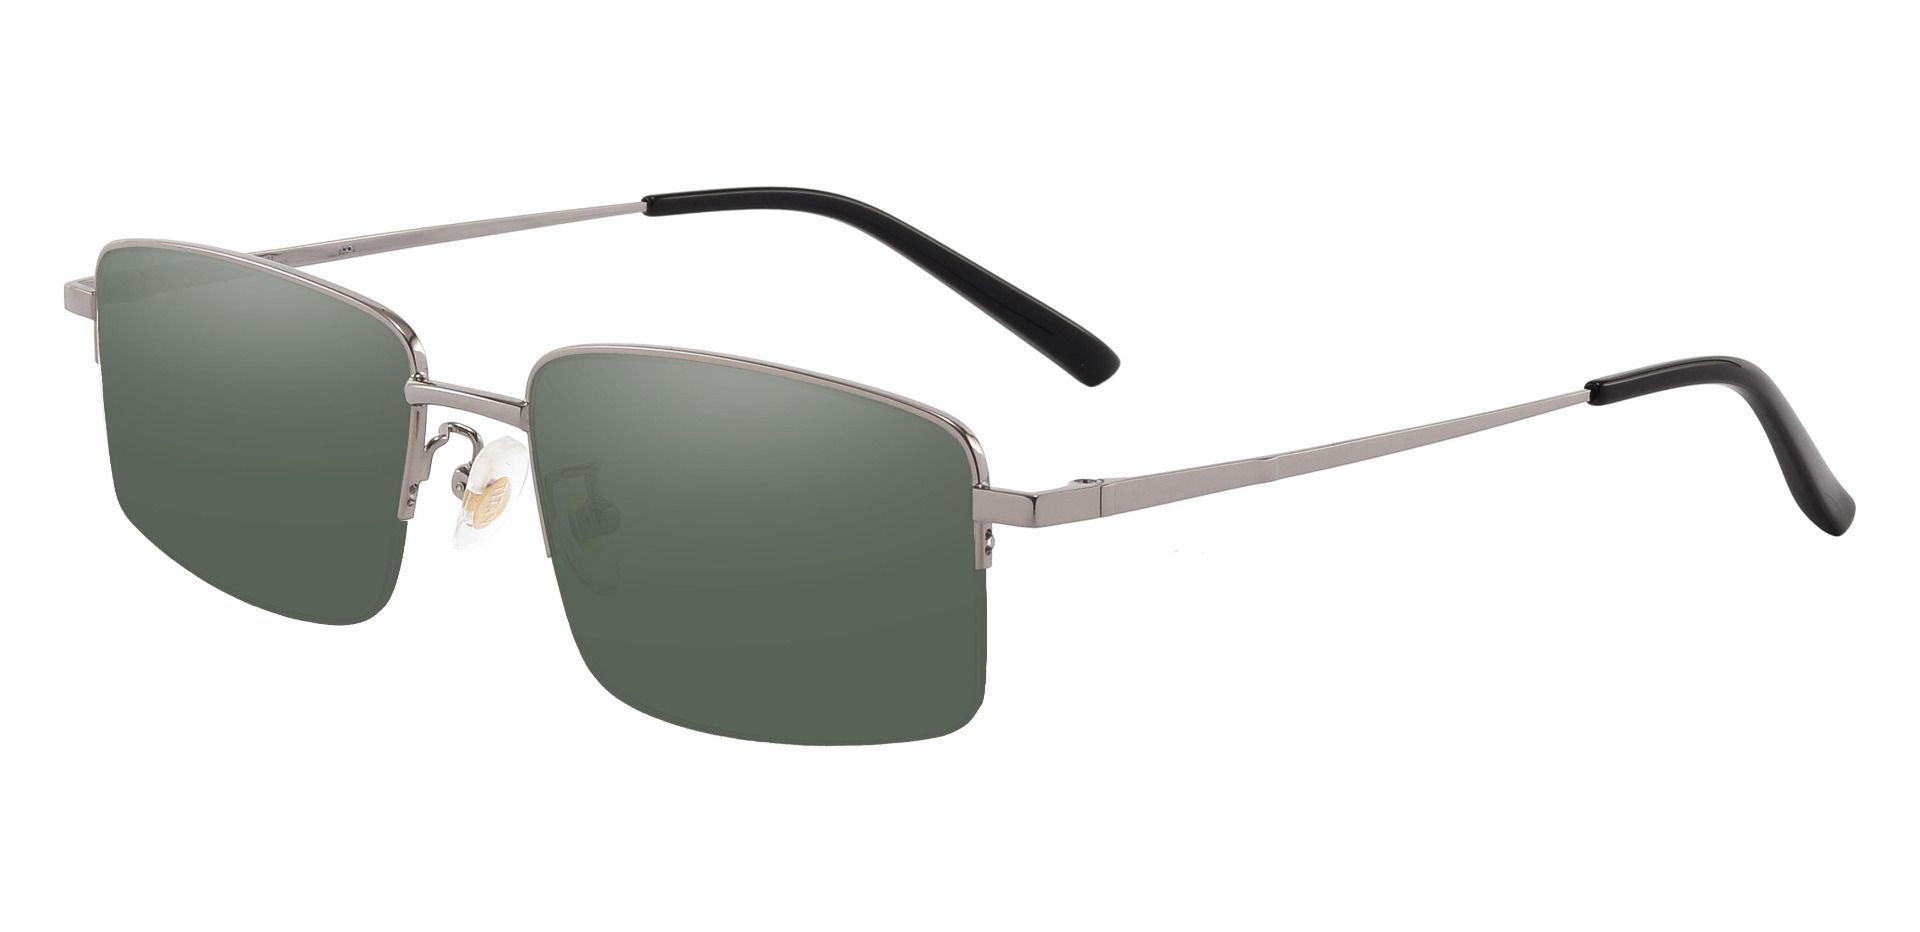 Wayne Rectangle Lined Bifocal Sunglasses - Gray Frame With Green Lenses